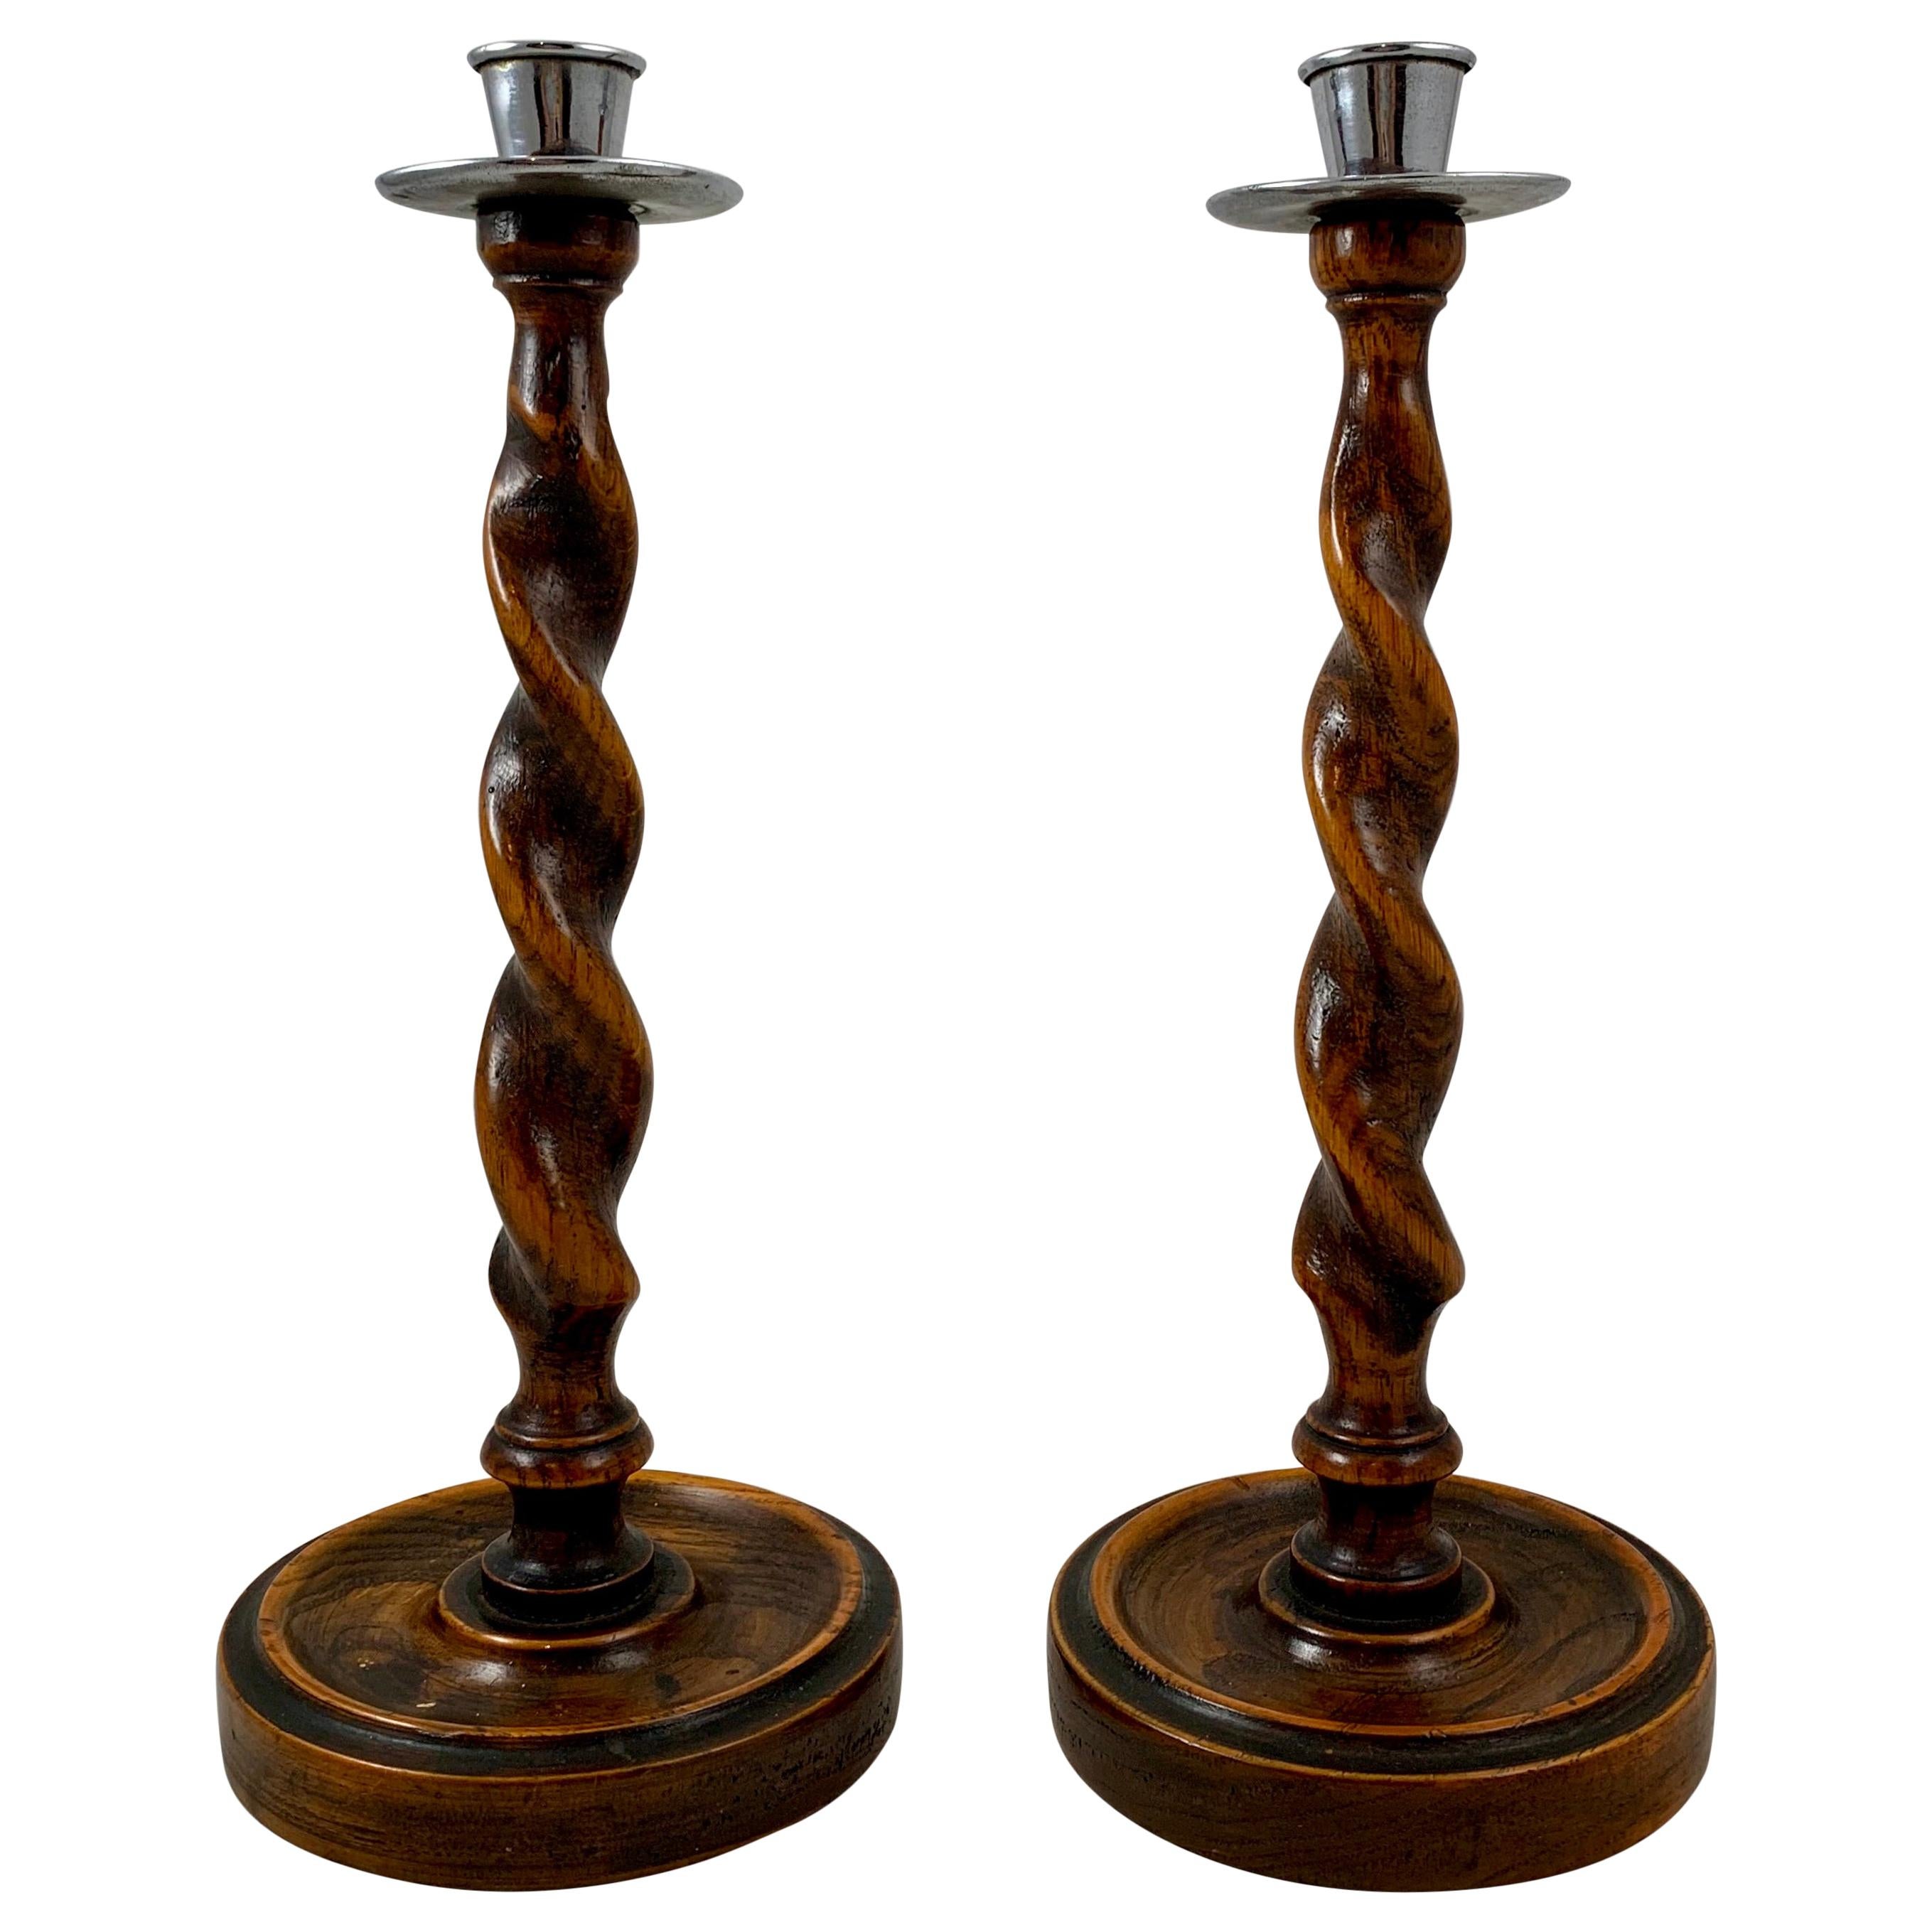 19th Century English Barley-Twist Oak and Pewter Topped Candlesticks, a Pair